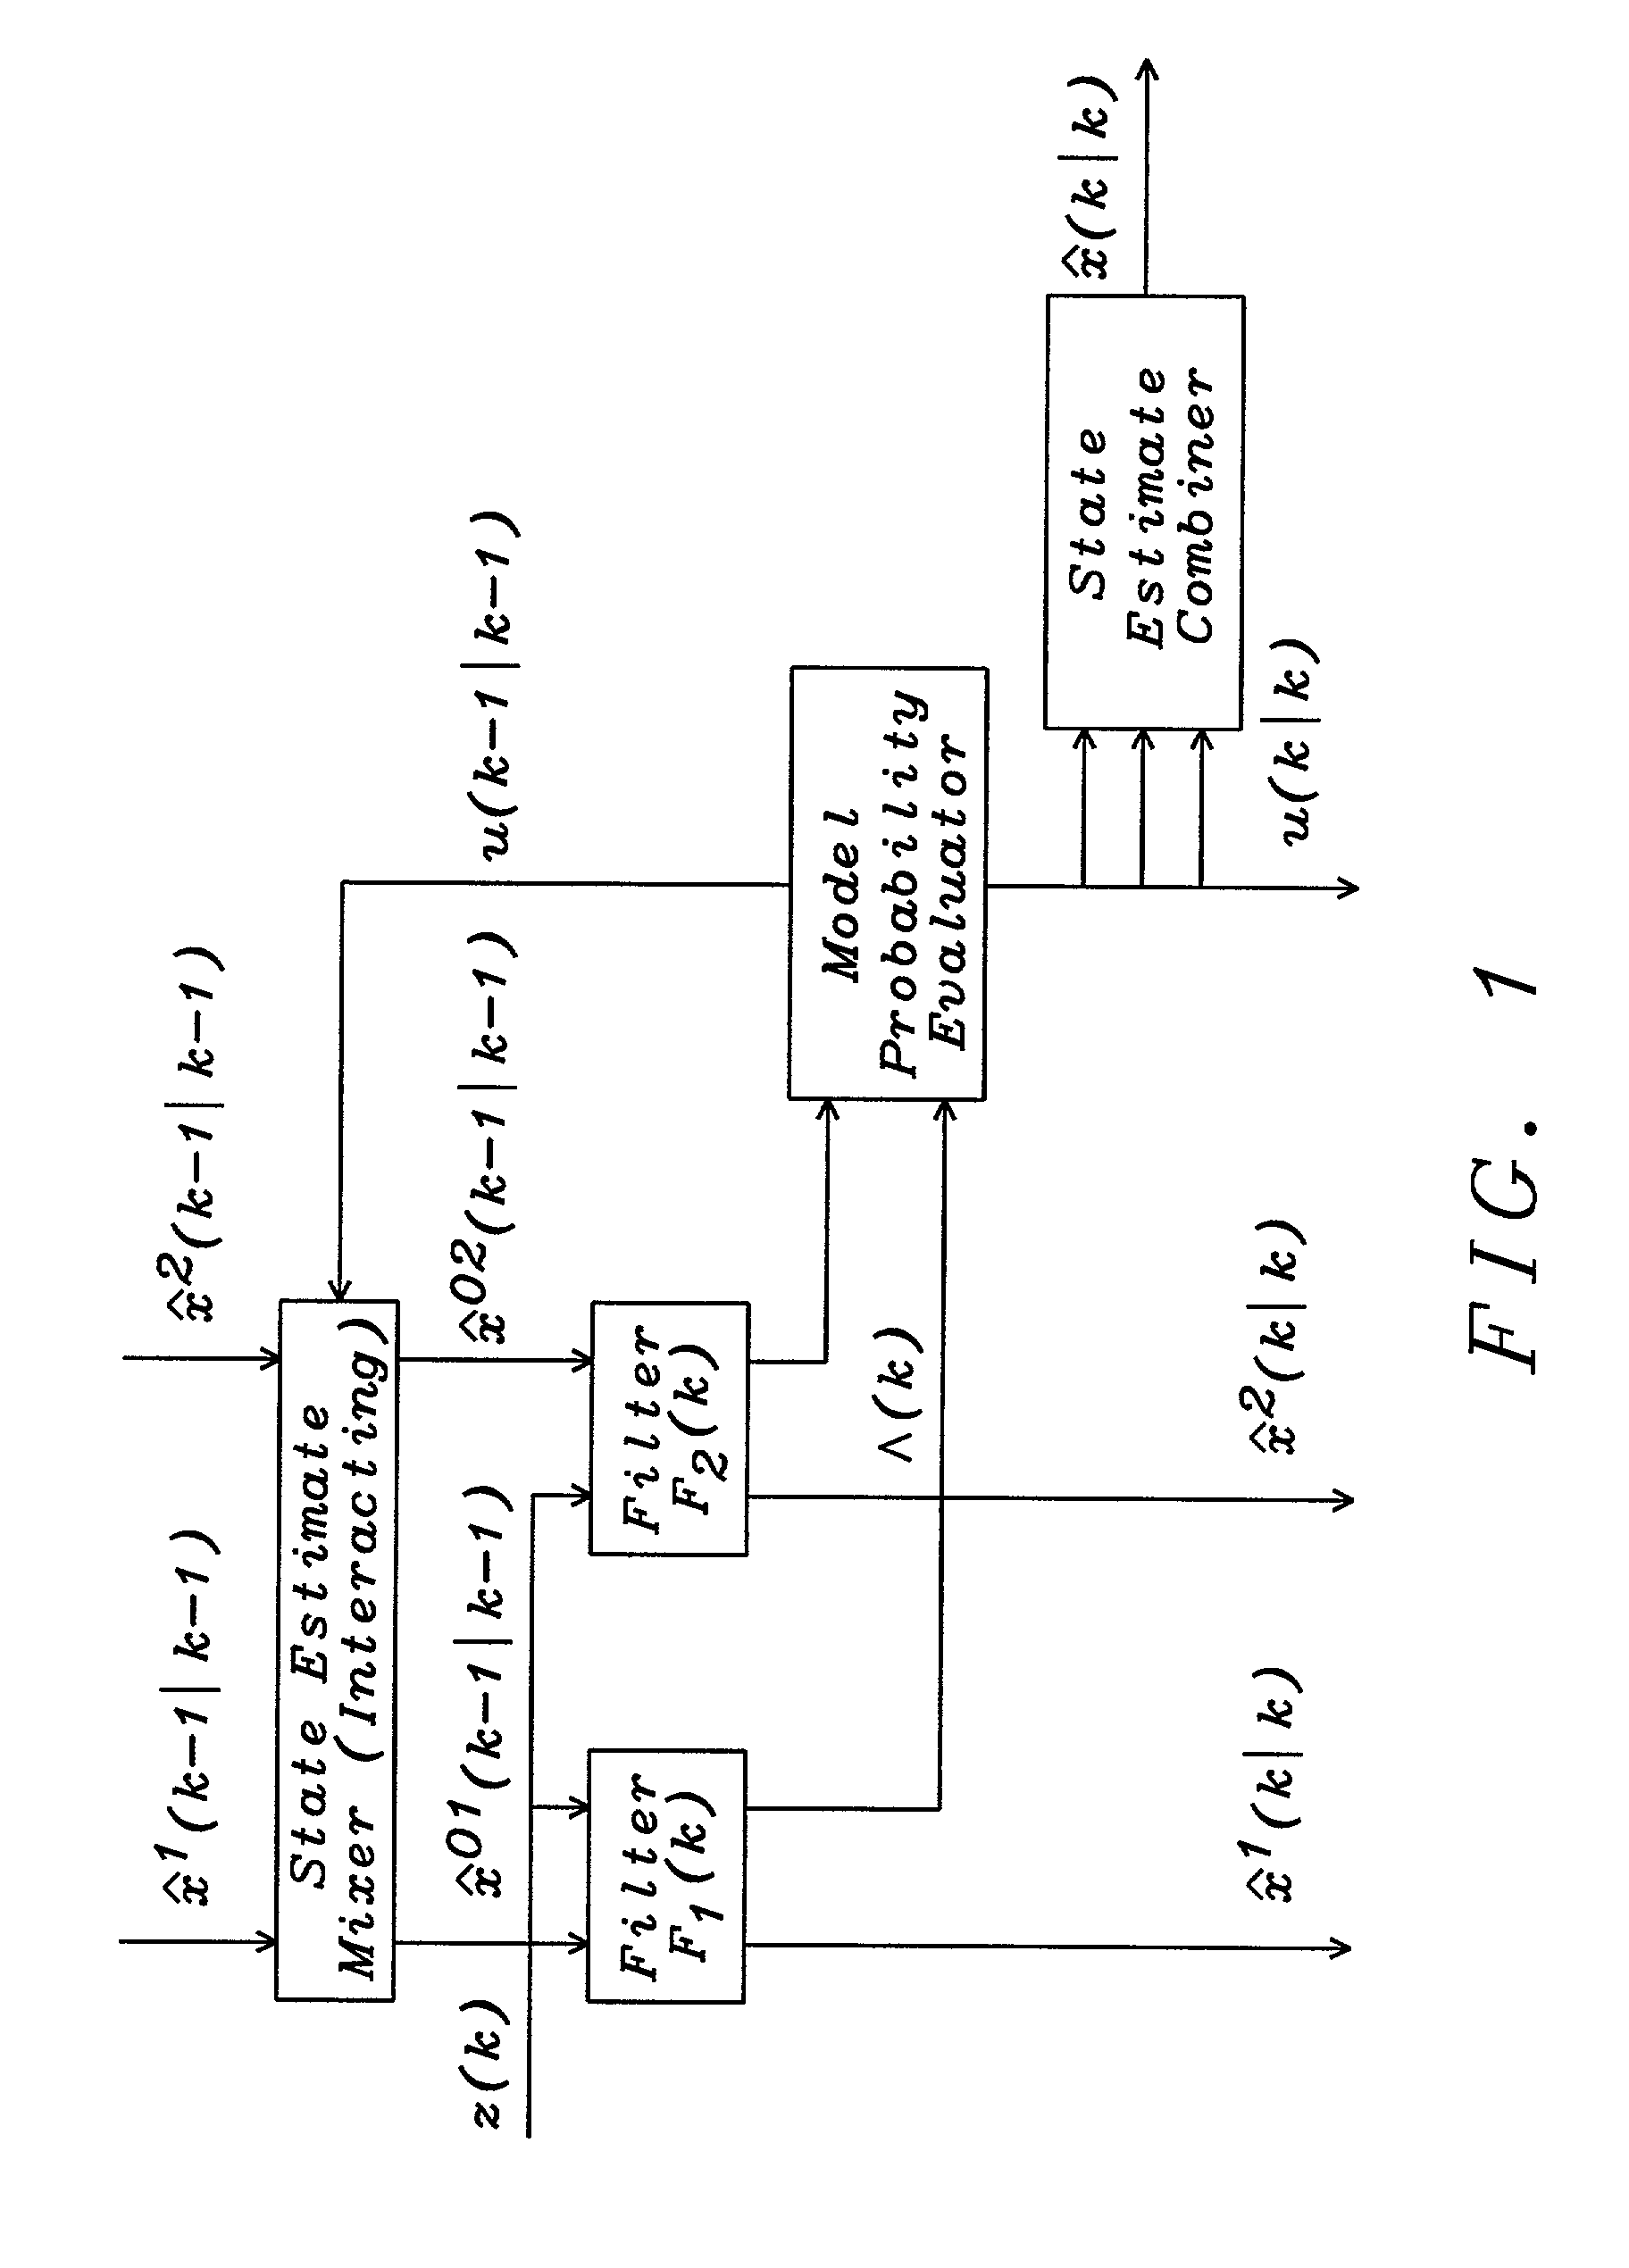 Maneuvering target tracking method via modifying the interacting multiple model (IMM) and the interacting acceleration compensation (IAC) algorithms